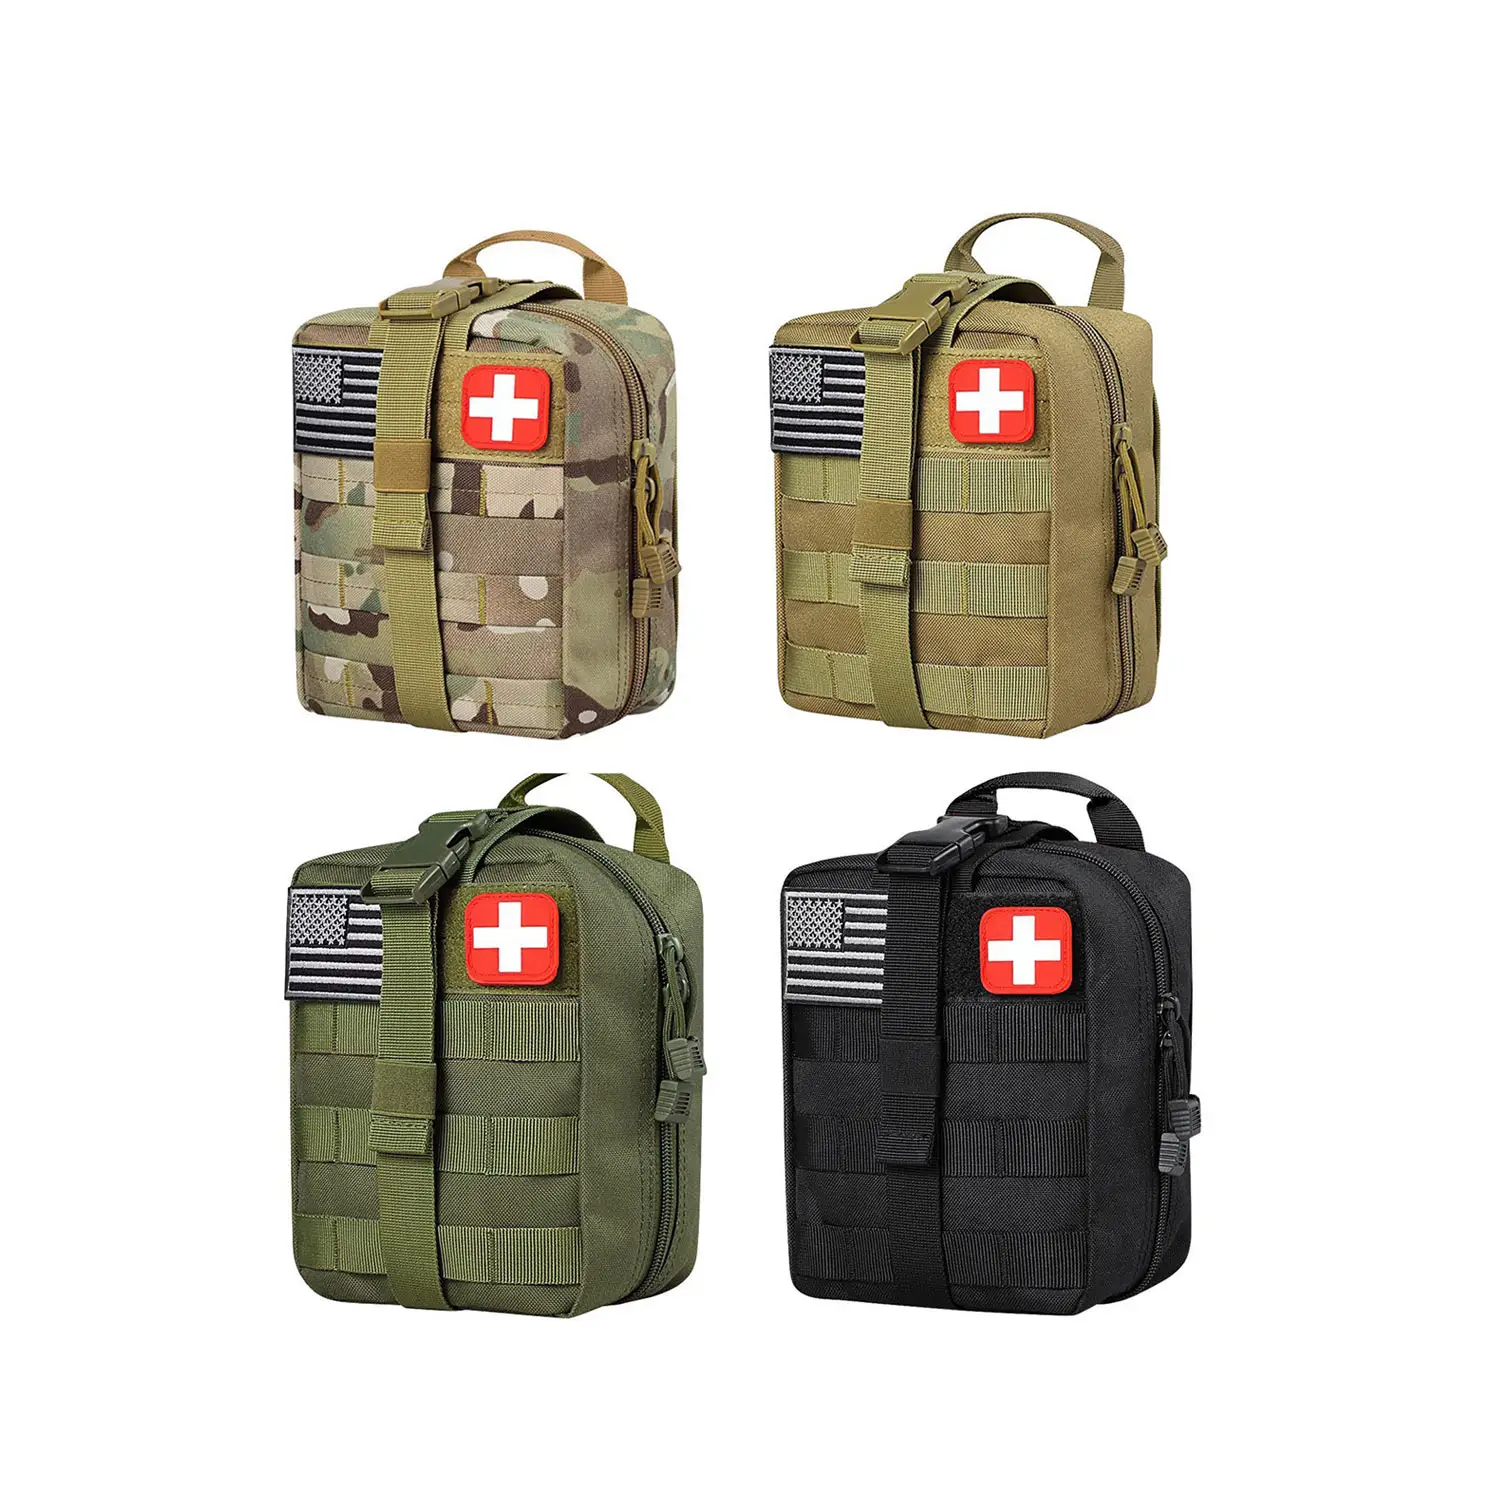 Hot Sale Survival Gear Bag Portable Tactical Emergency Medical Kit Survival Kit For Outdoor Travel Camping